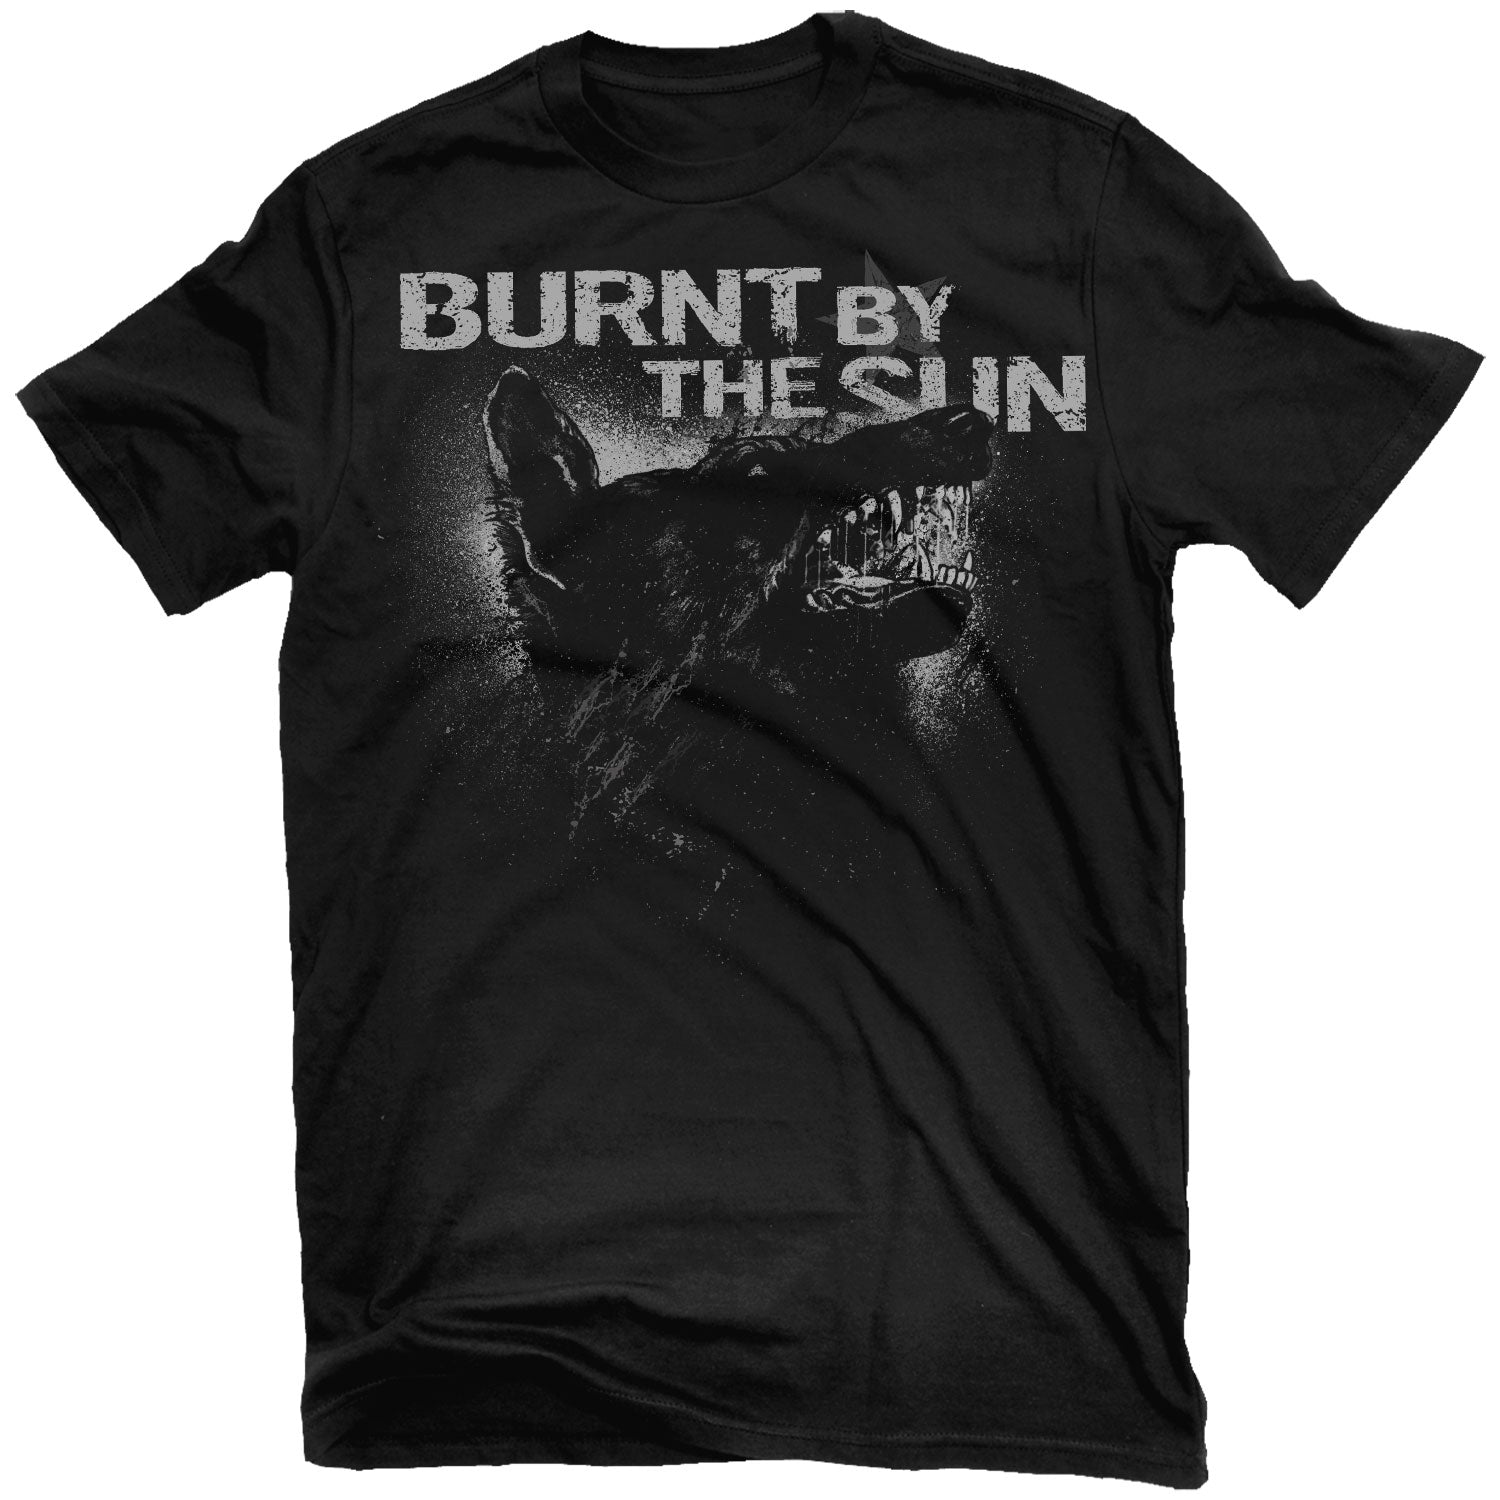 Burnt By The Sun "Heart Of Darkness" T-Shirt